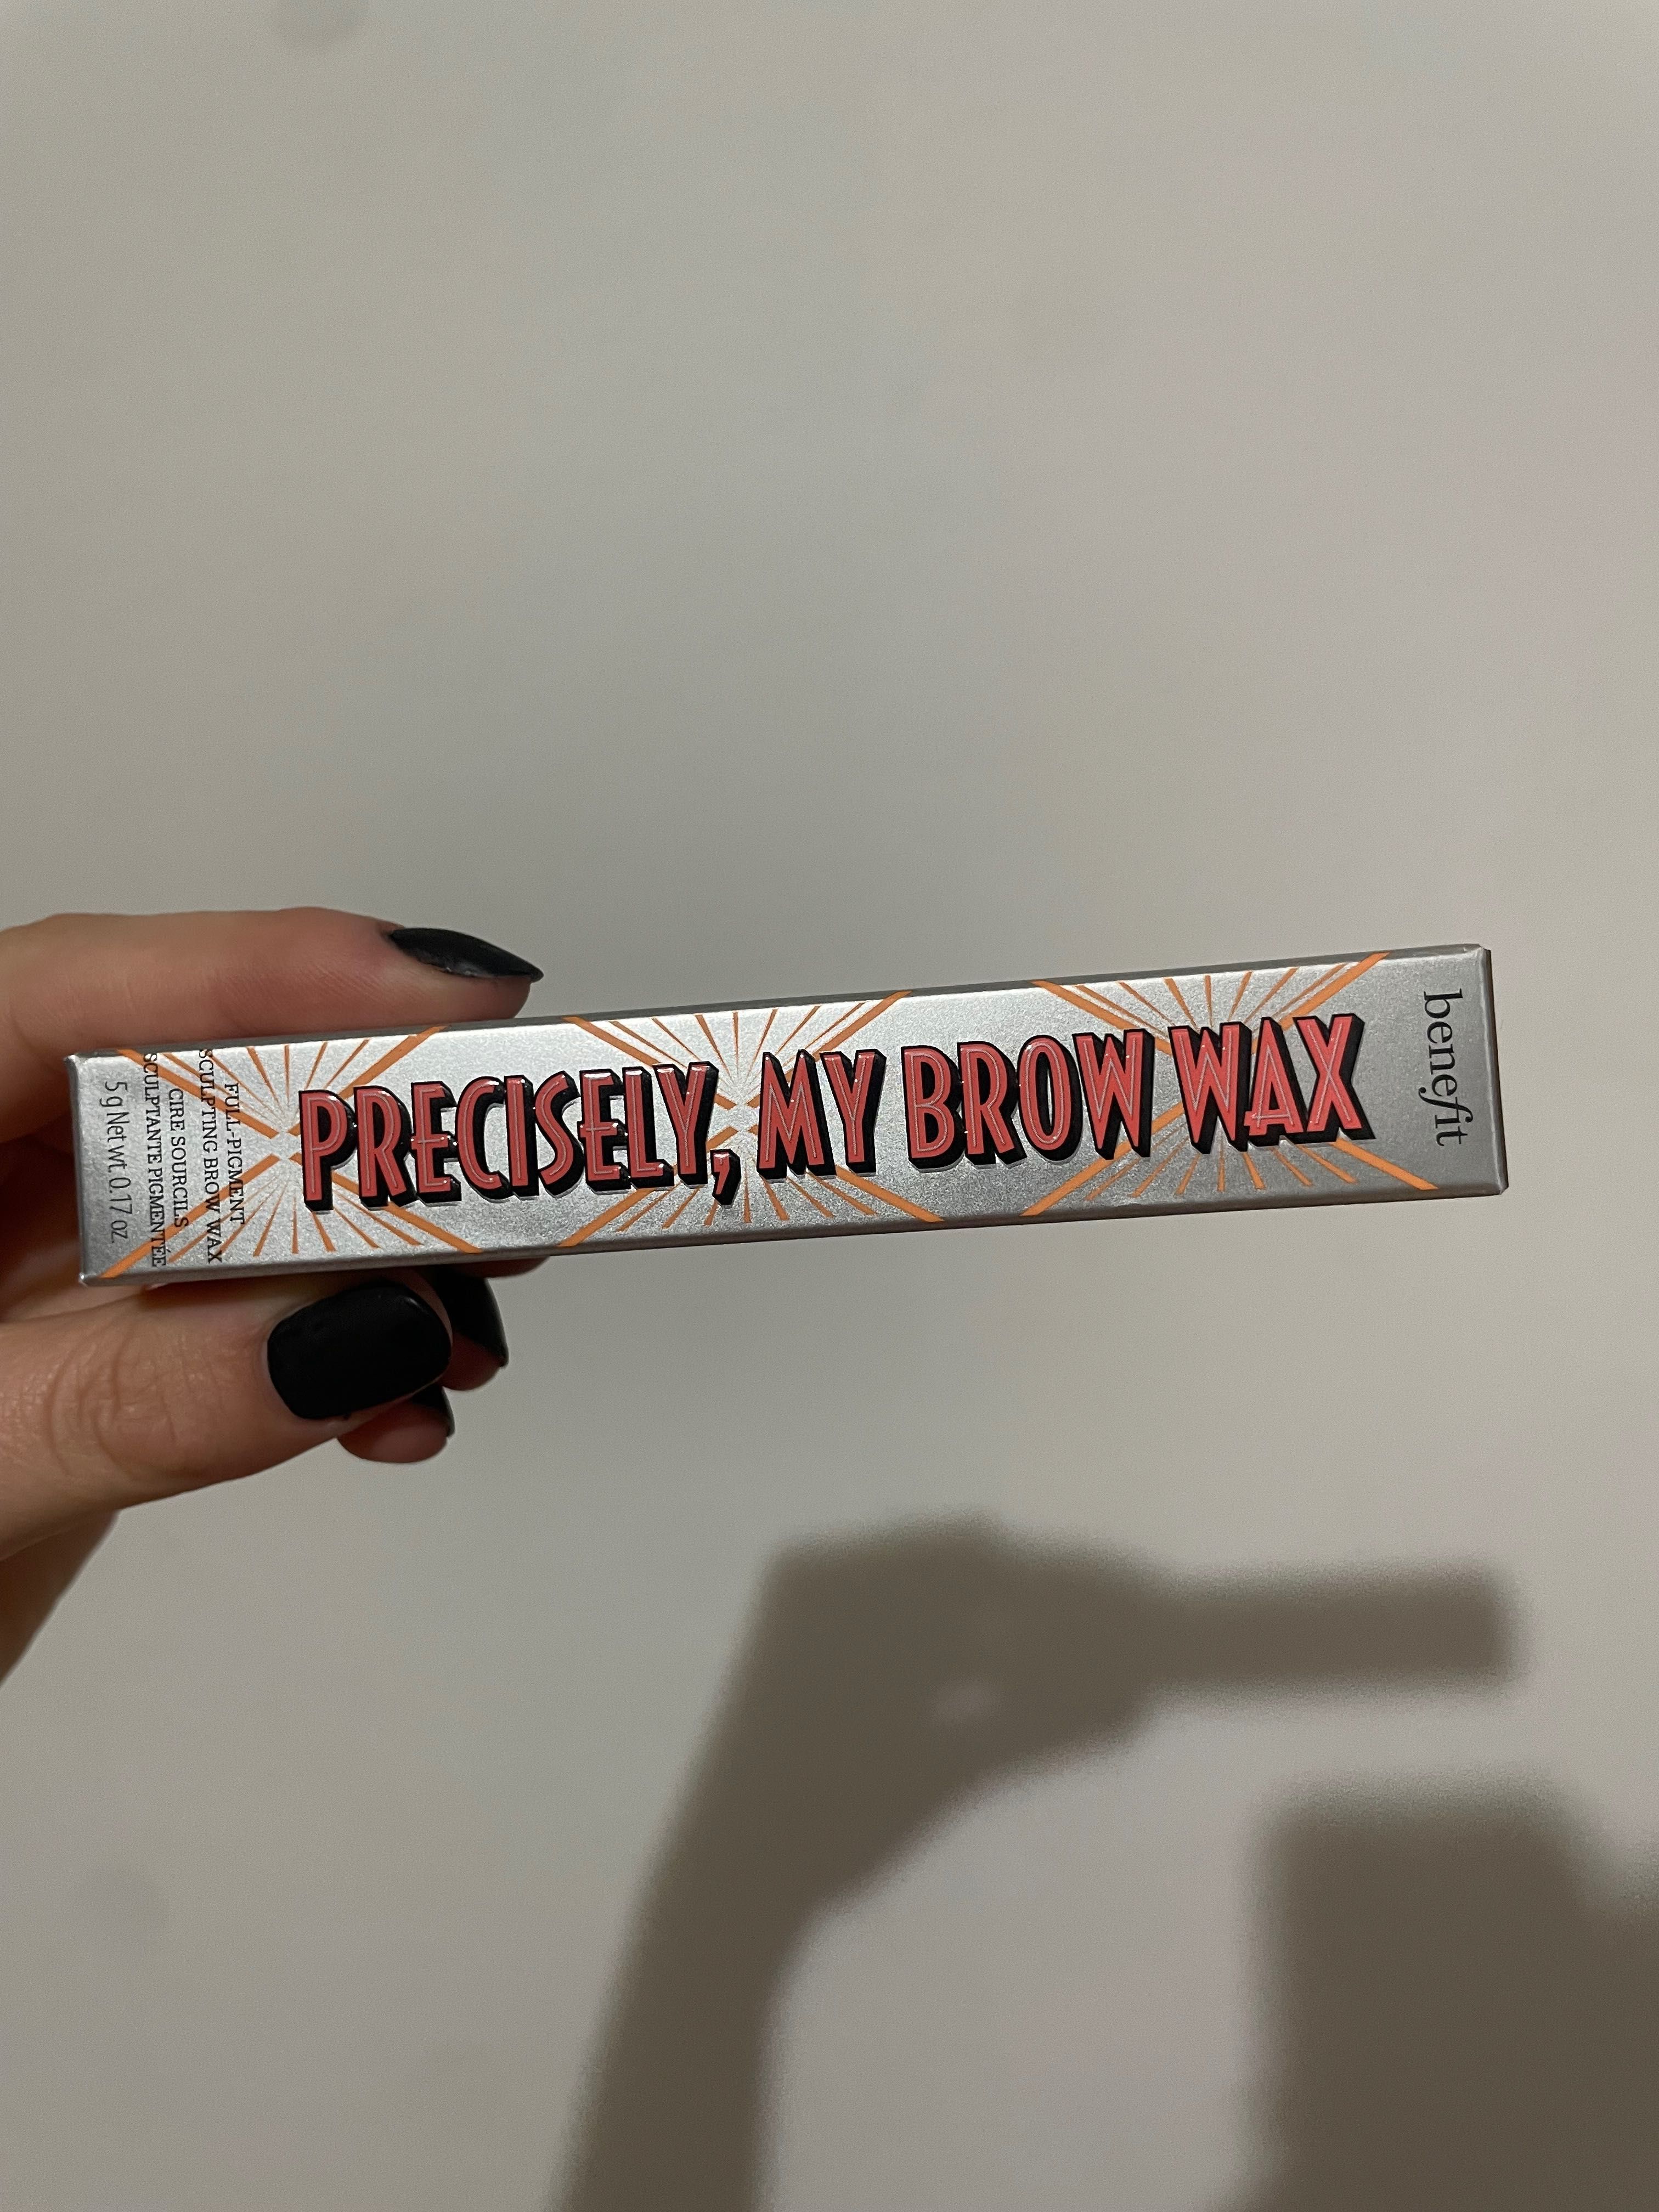 Precisely, My brow wax